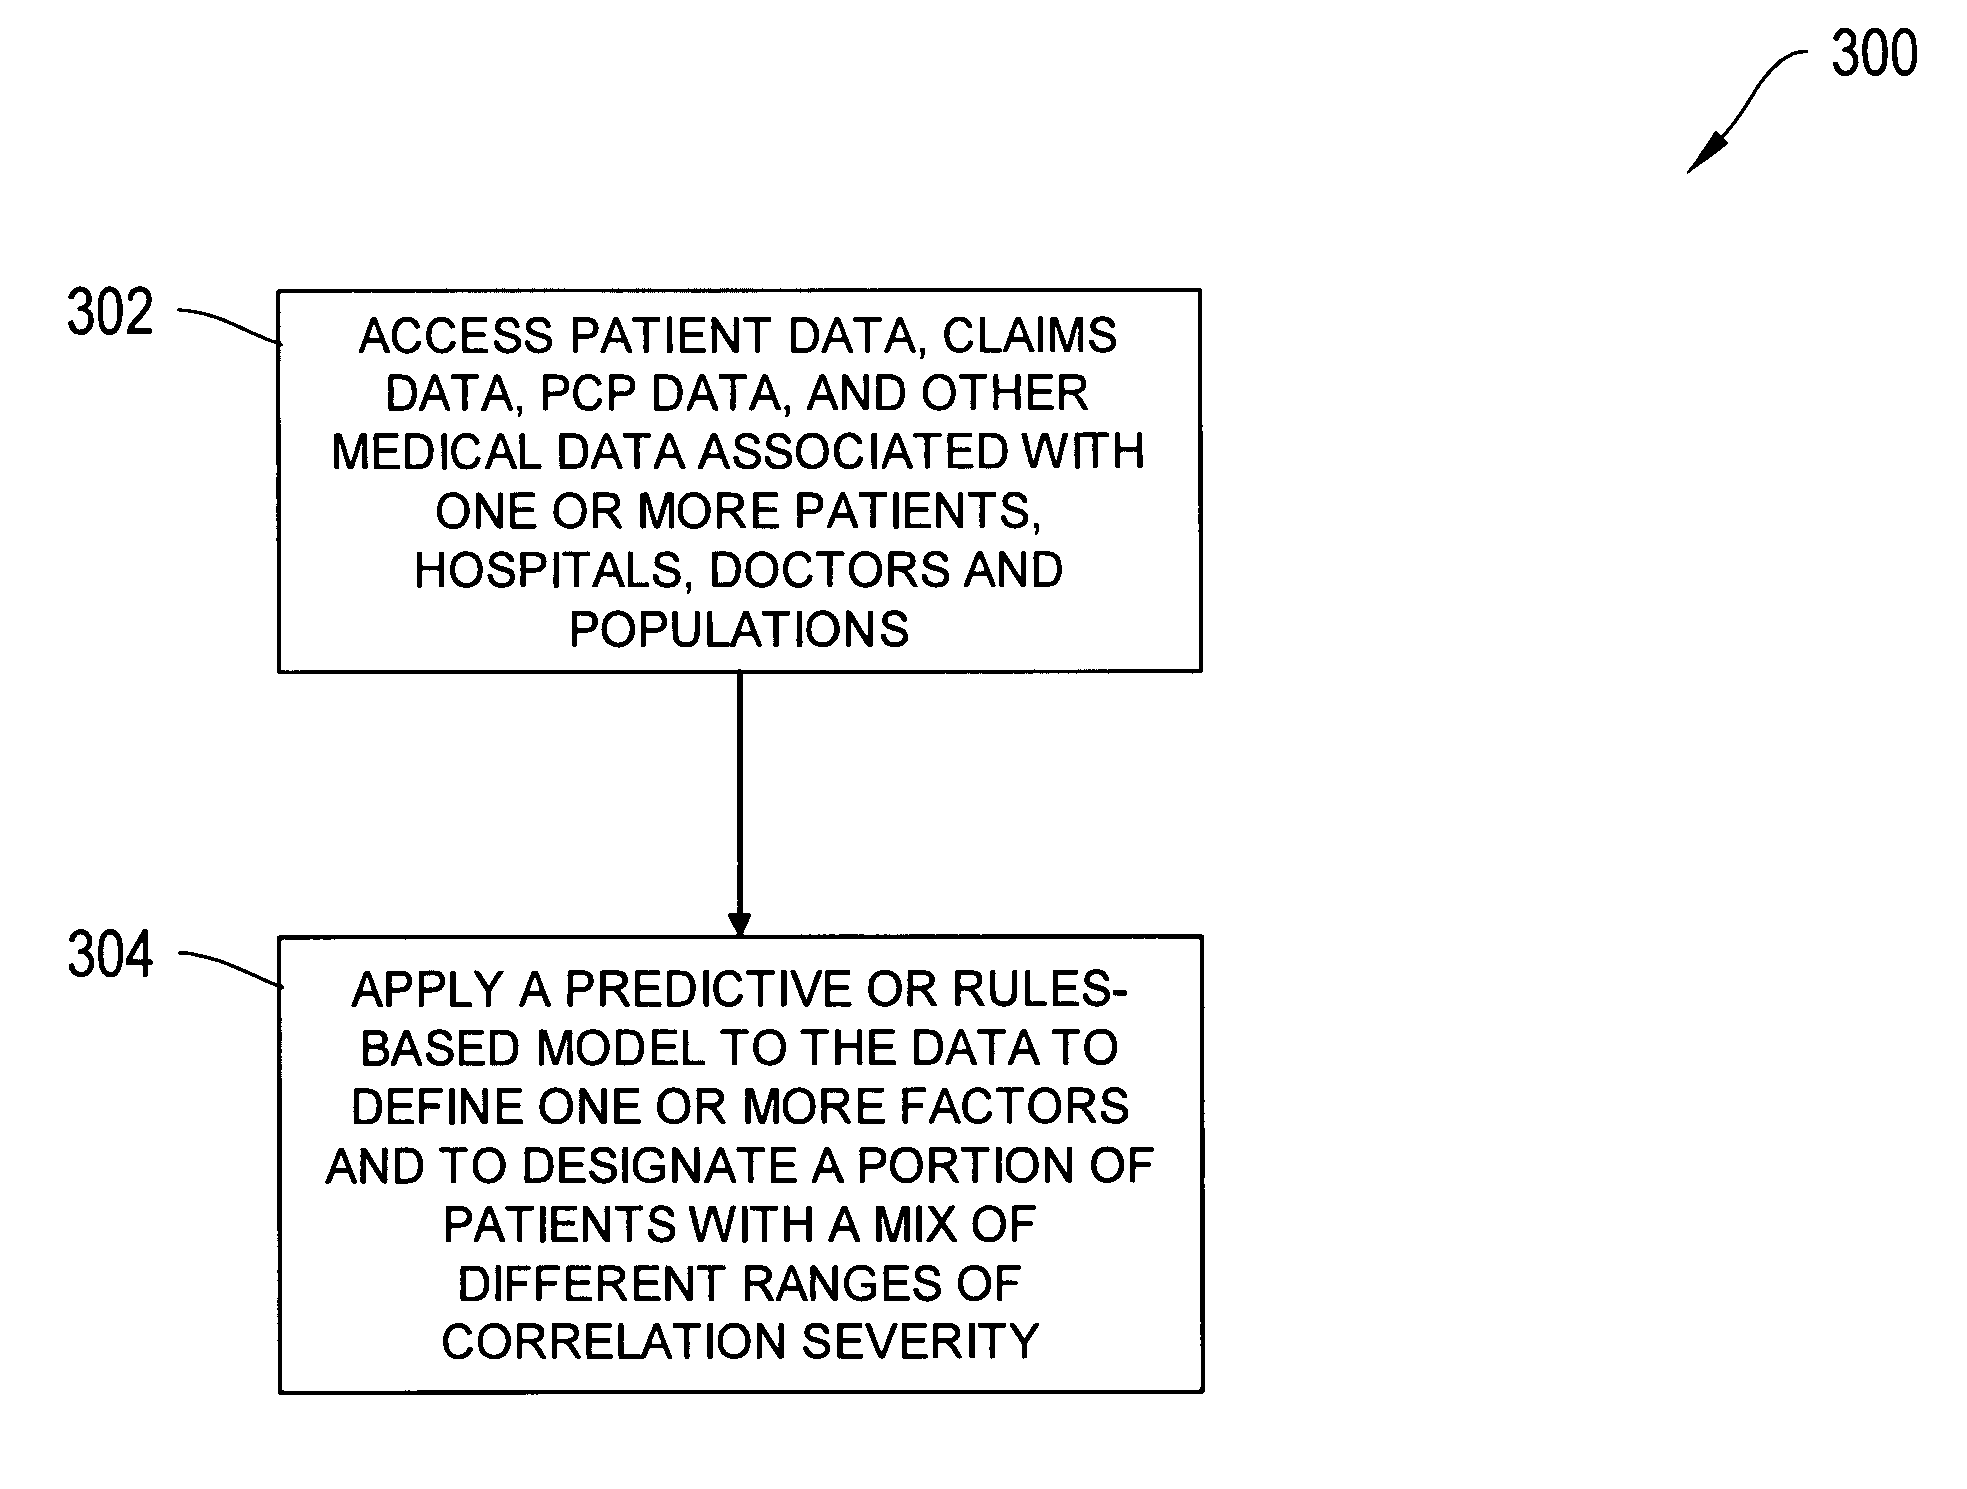 Systems and methods for analysis of healthcare provider performance